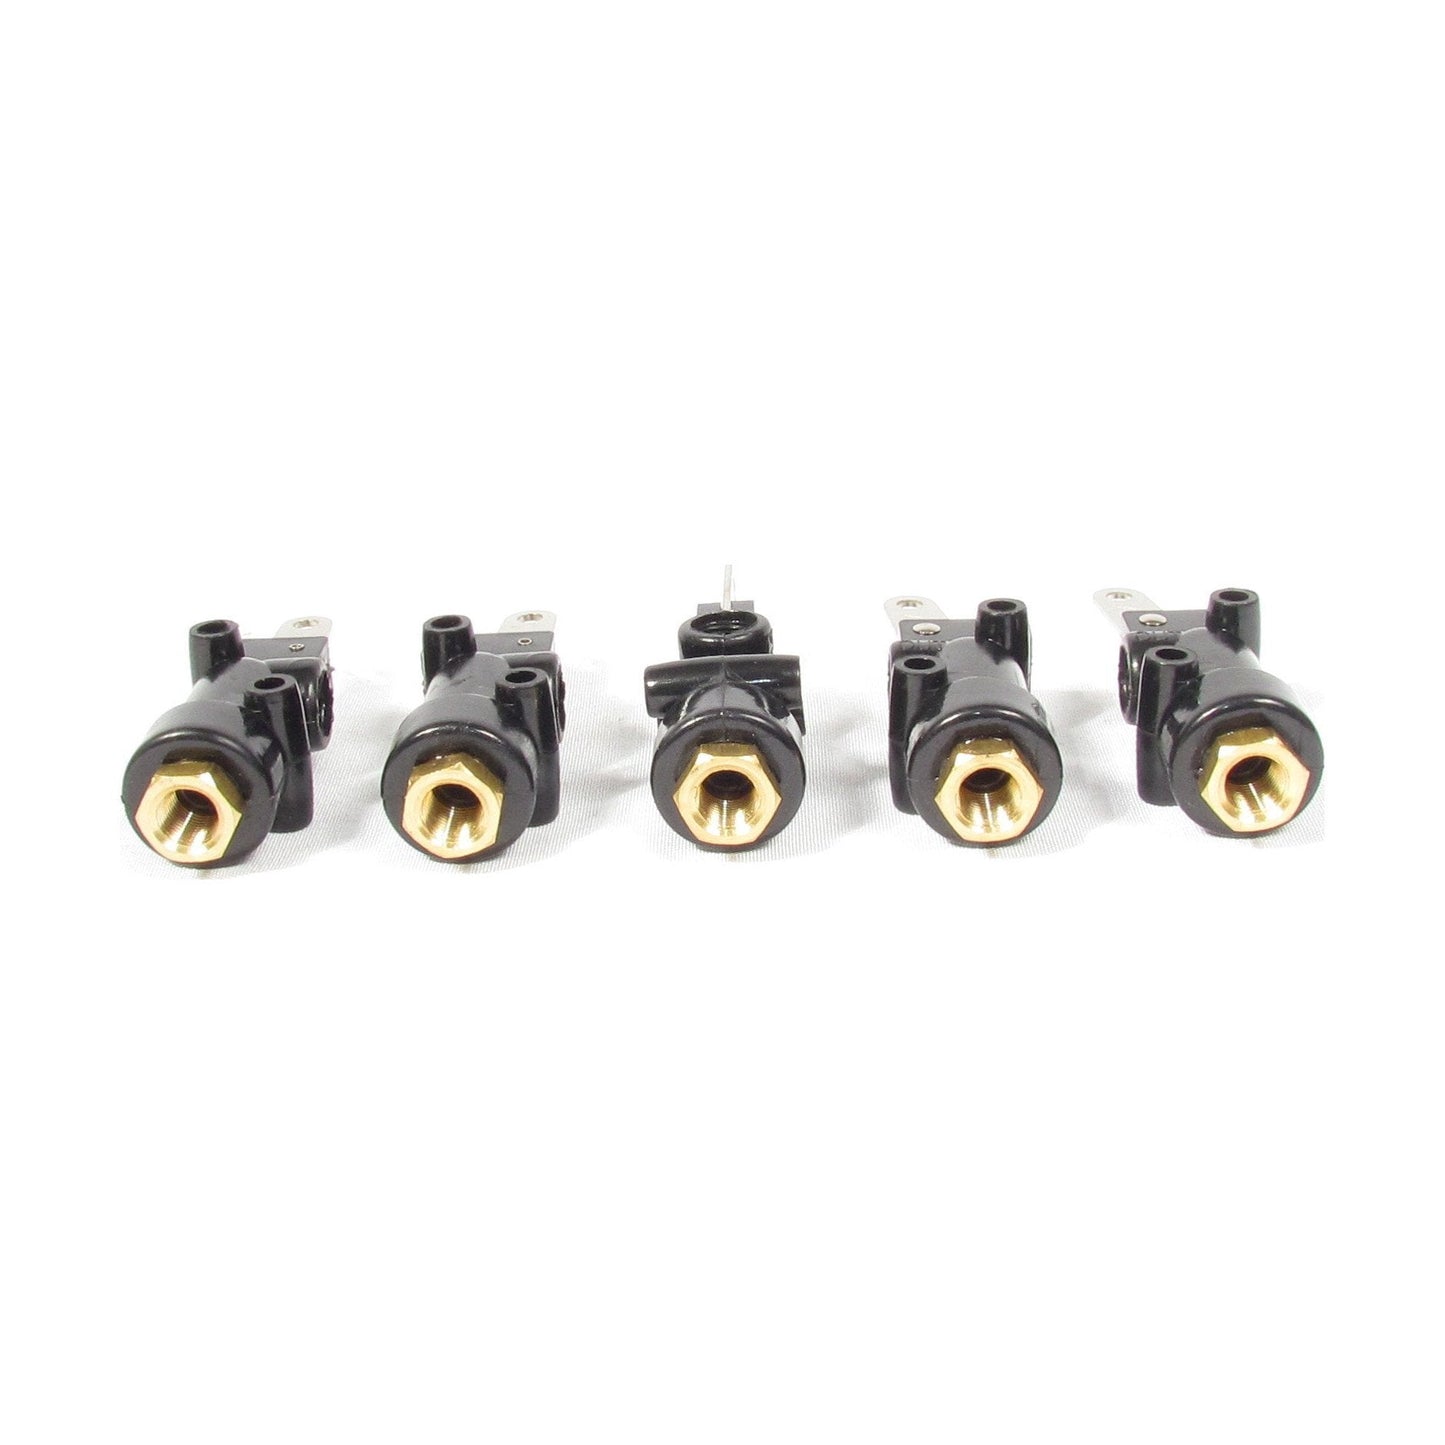 Fortpro HV-3 Air Horn Plastic Valve, Supply 1/4" NPT, Delivery 1/8" NPT, Replacement for Mack 20QE29317 - 5 PACK | F224901